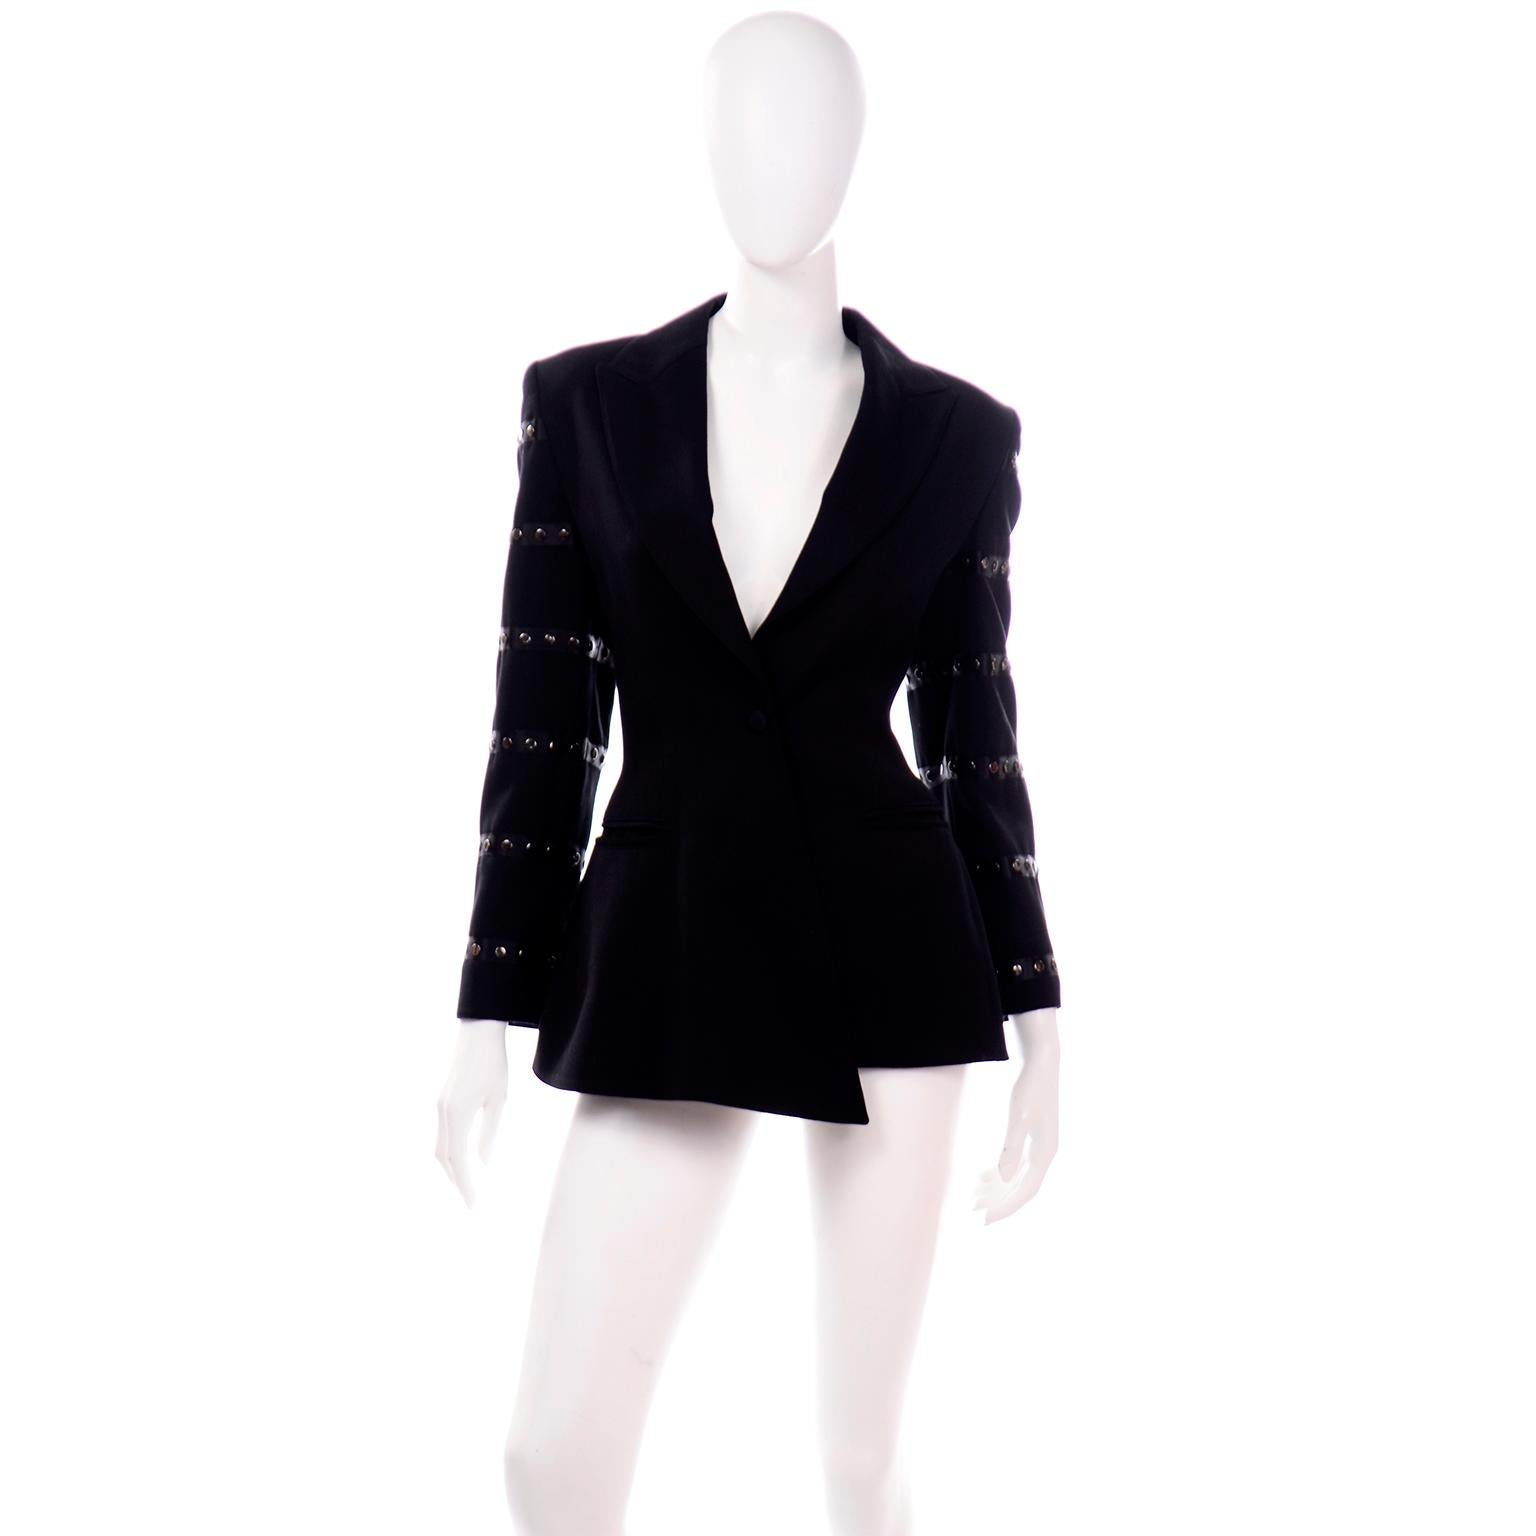 This is an asymmetrical vintage Claude Montana jacket in black wool with a single snap closure and front slit pockets. This great vintage late 1980's jacket is fully lined in rayon and we love the avant garde hemline with a center front point. The